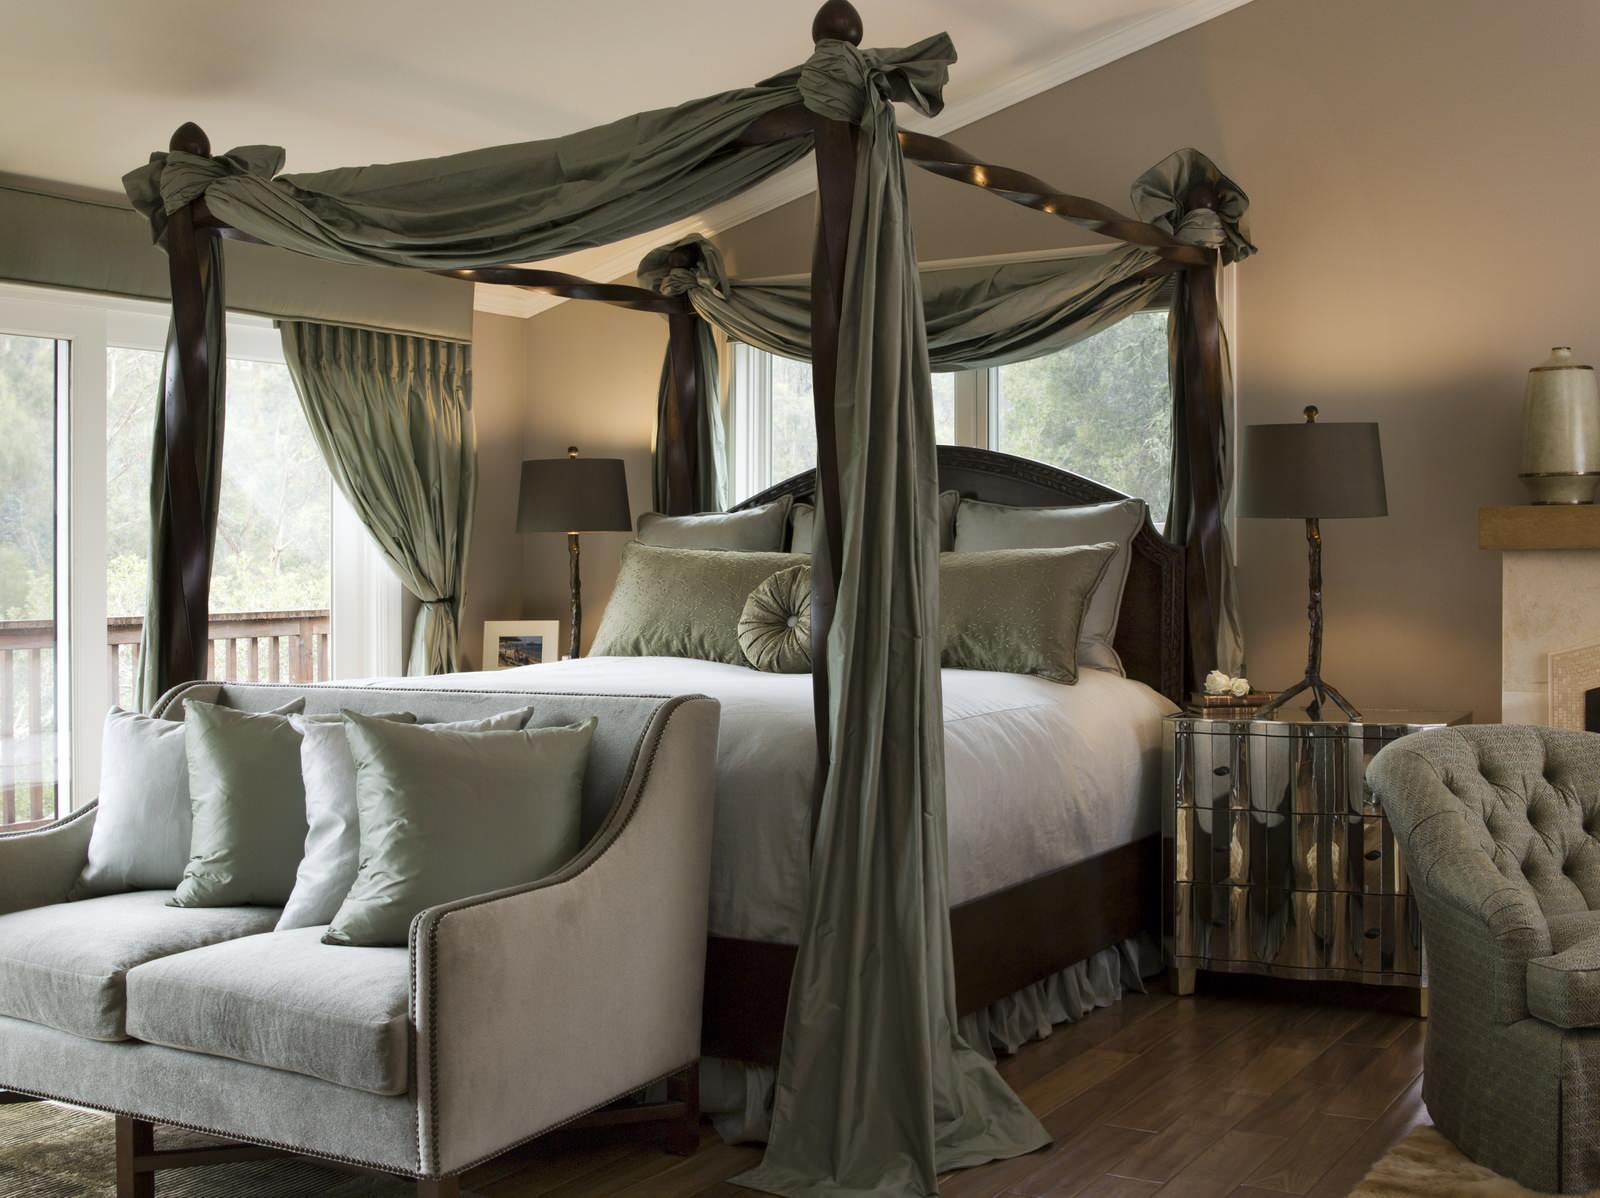 Browse Bedroom Lighting ideas and designs in Photos | Houzz UK